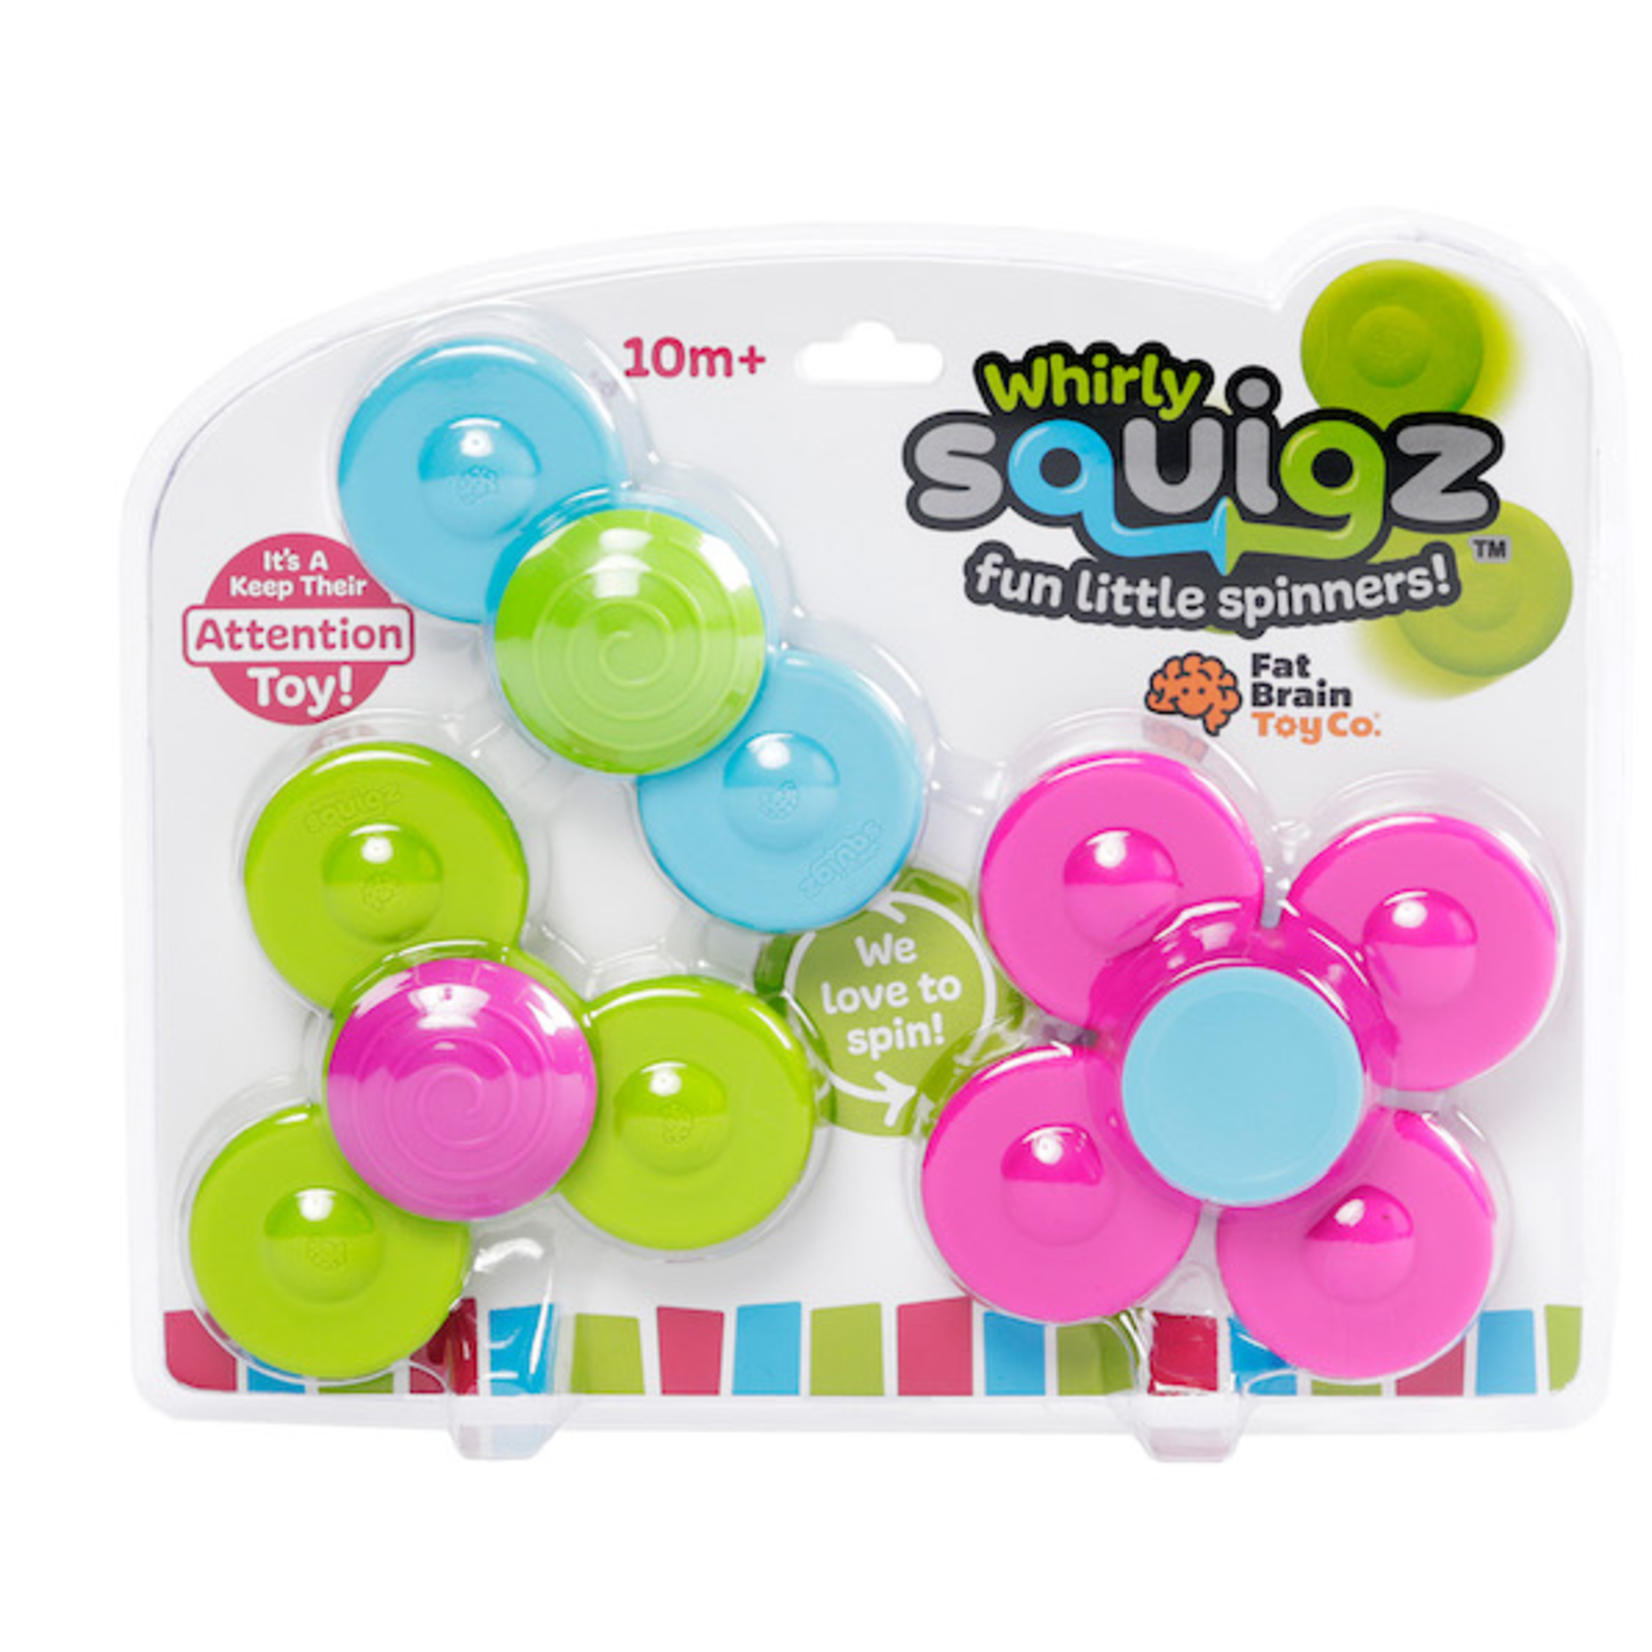 FAT BRAIN TOYS WHIRLY SQUIGZ